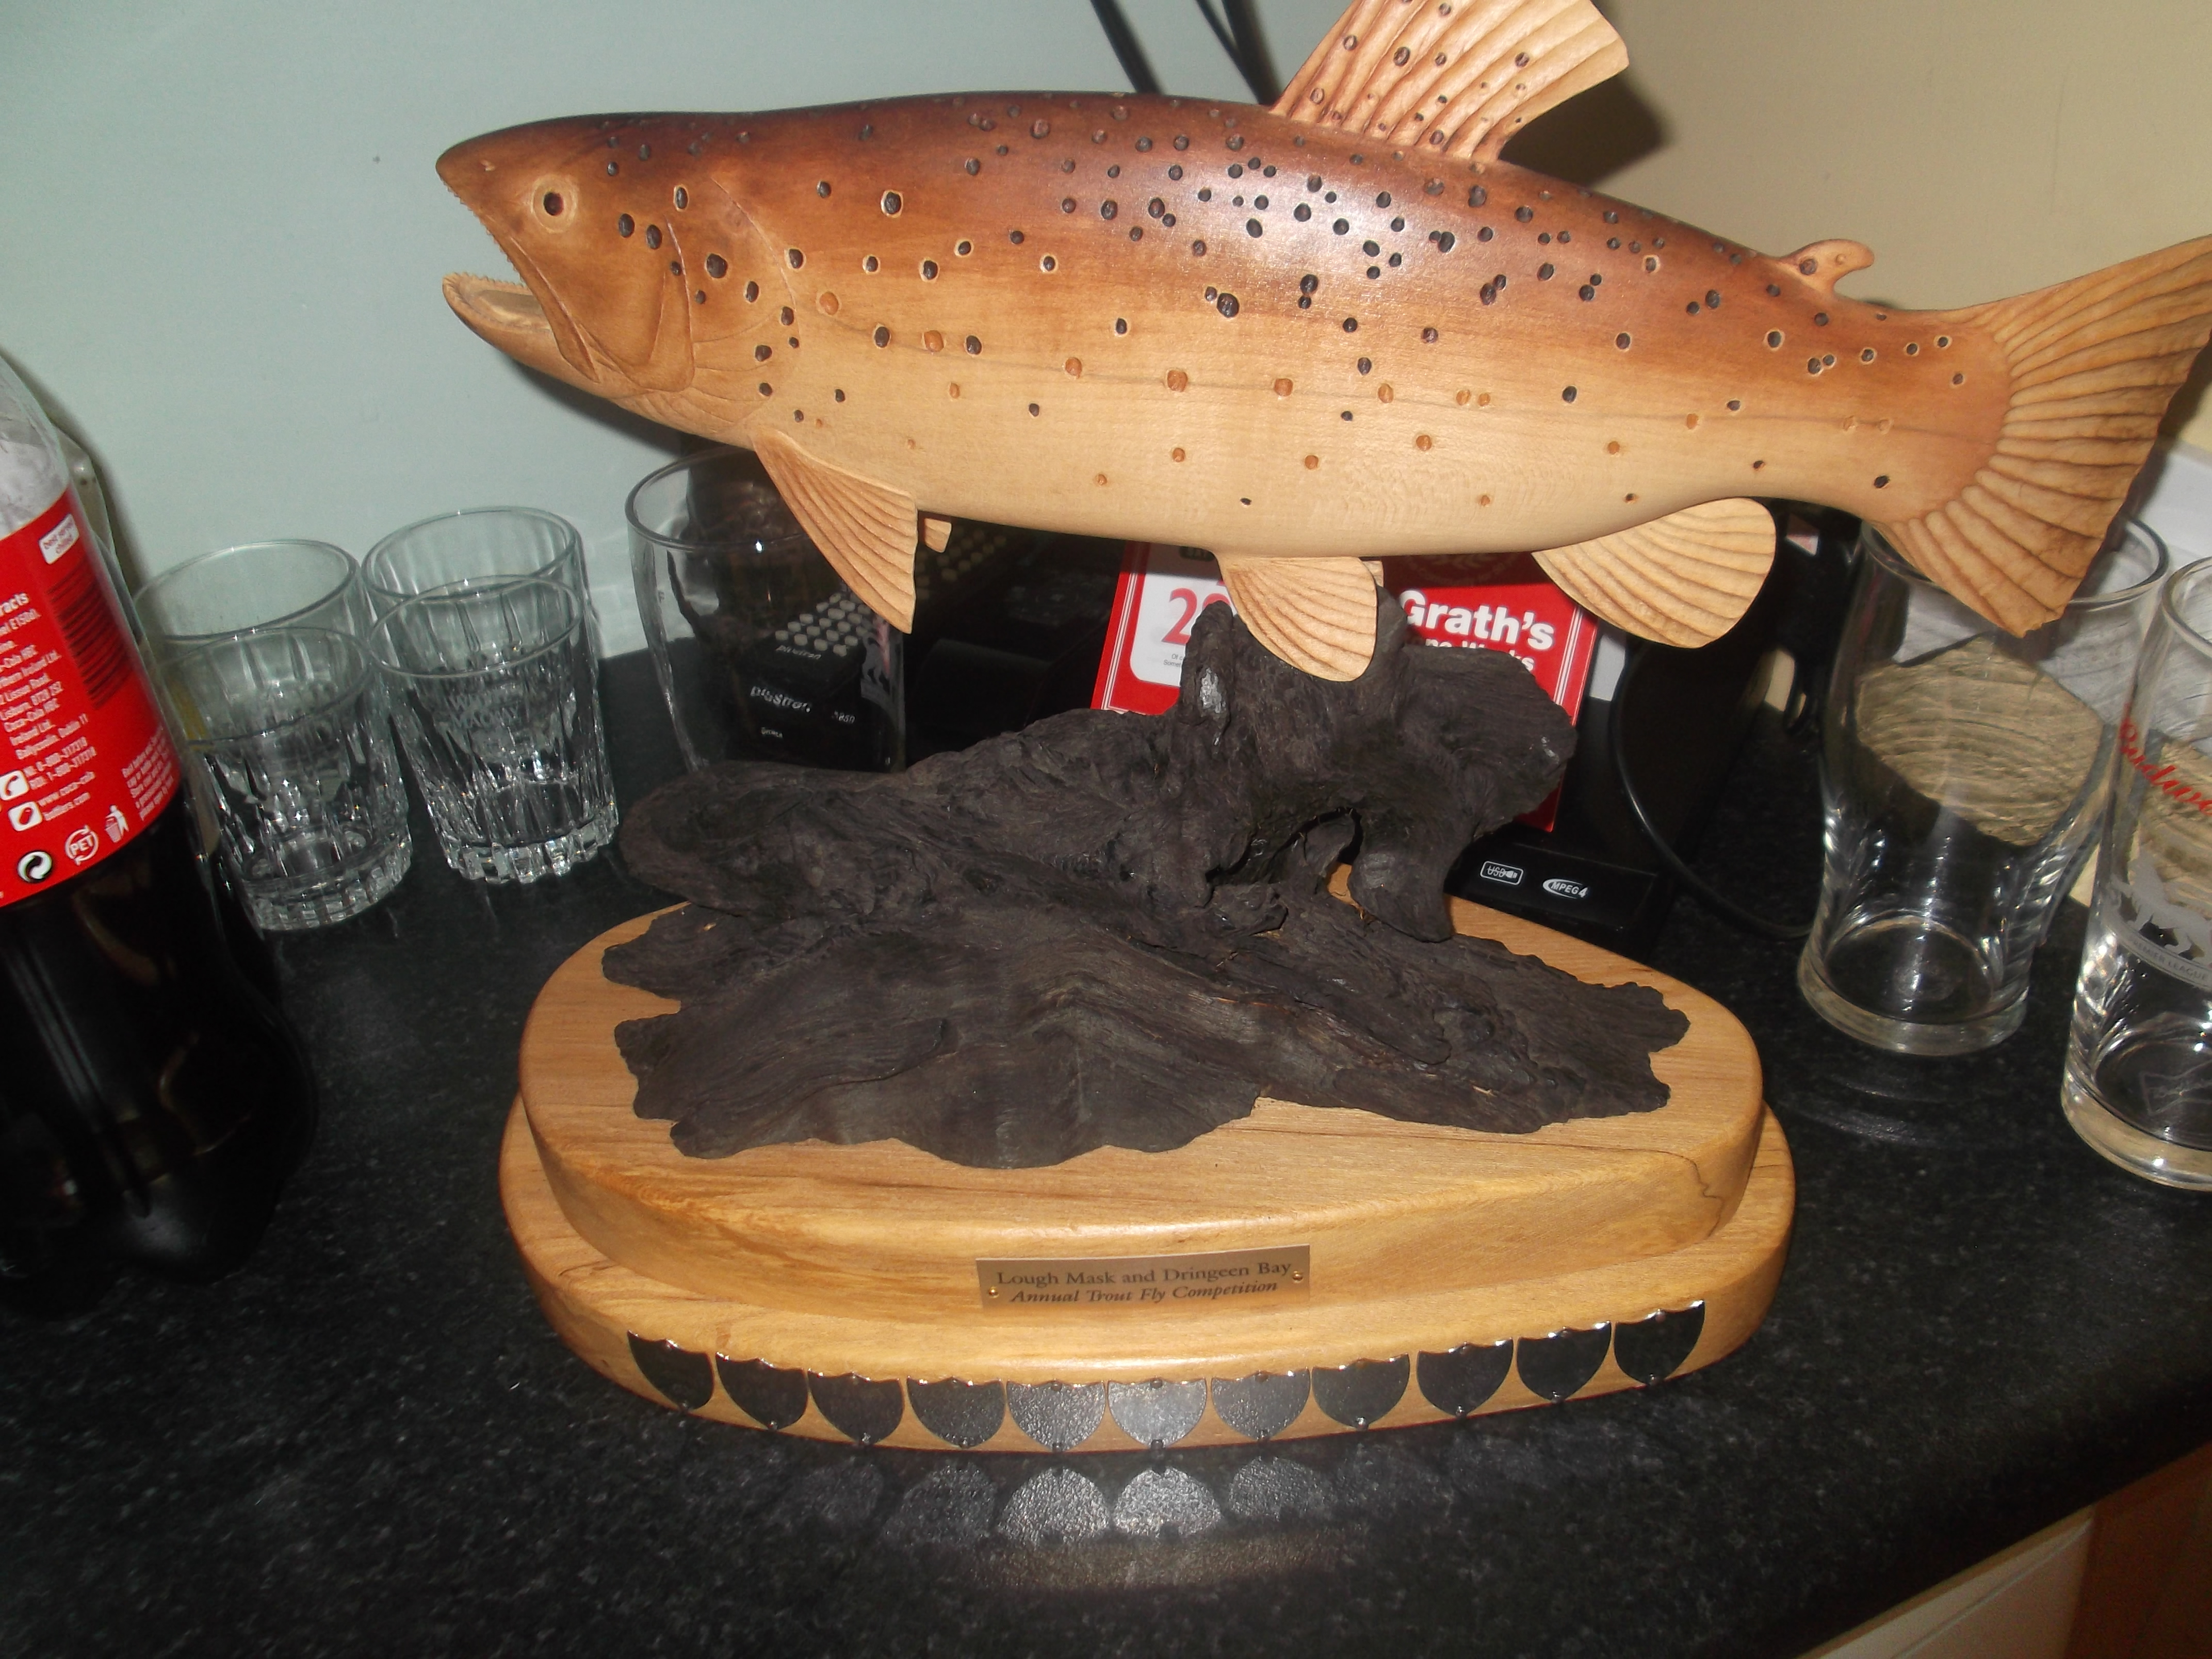 Dringeen Bay End Of Angling Season Annual Prize Trophy